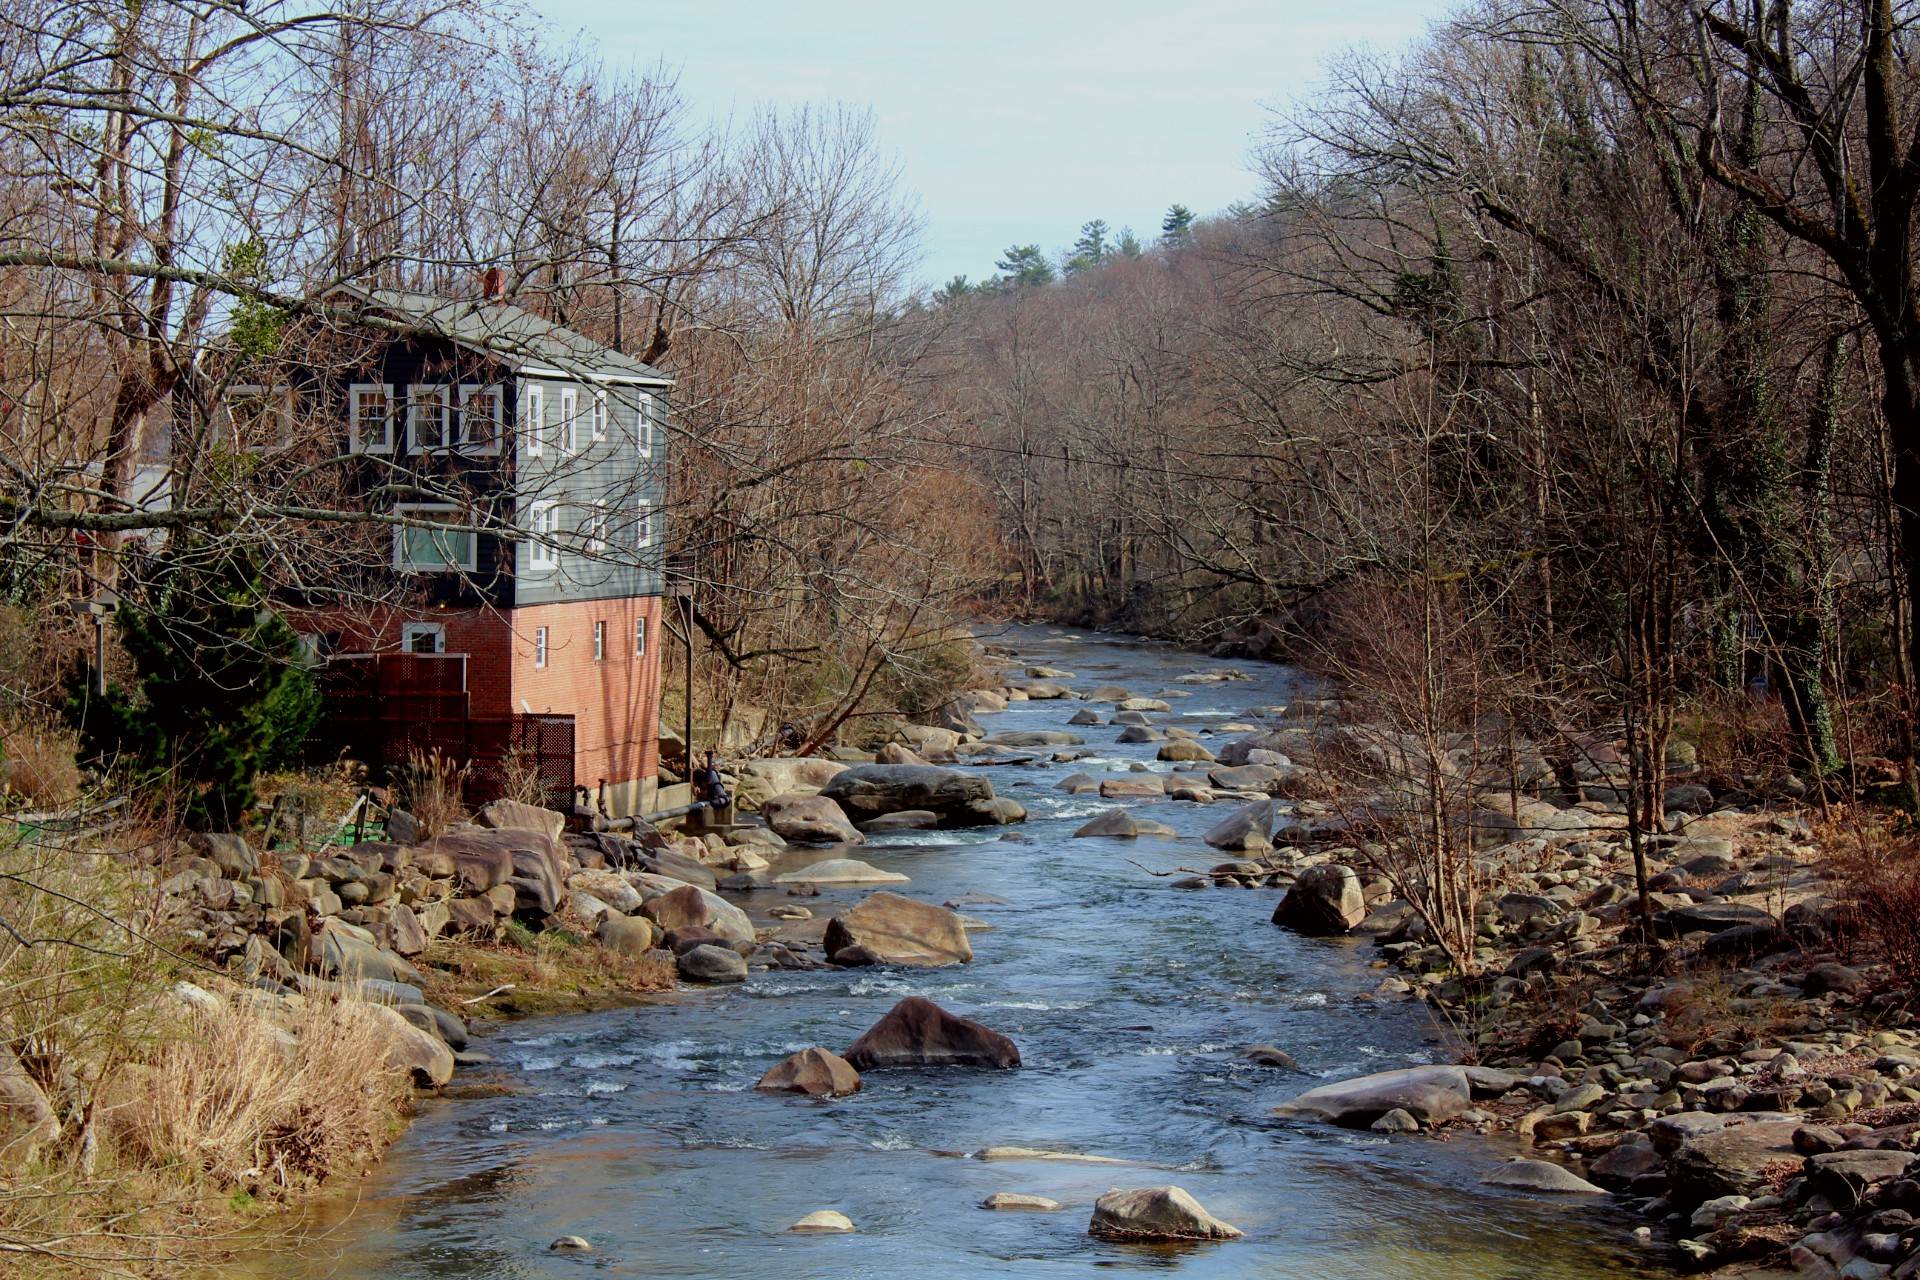 Rocky river flowing behind a blue house